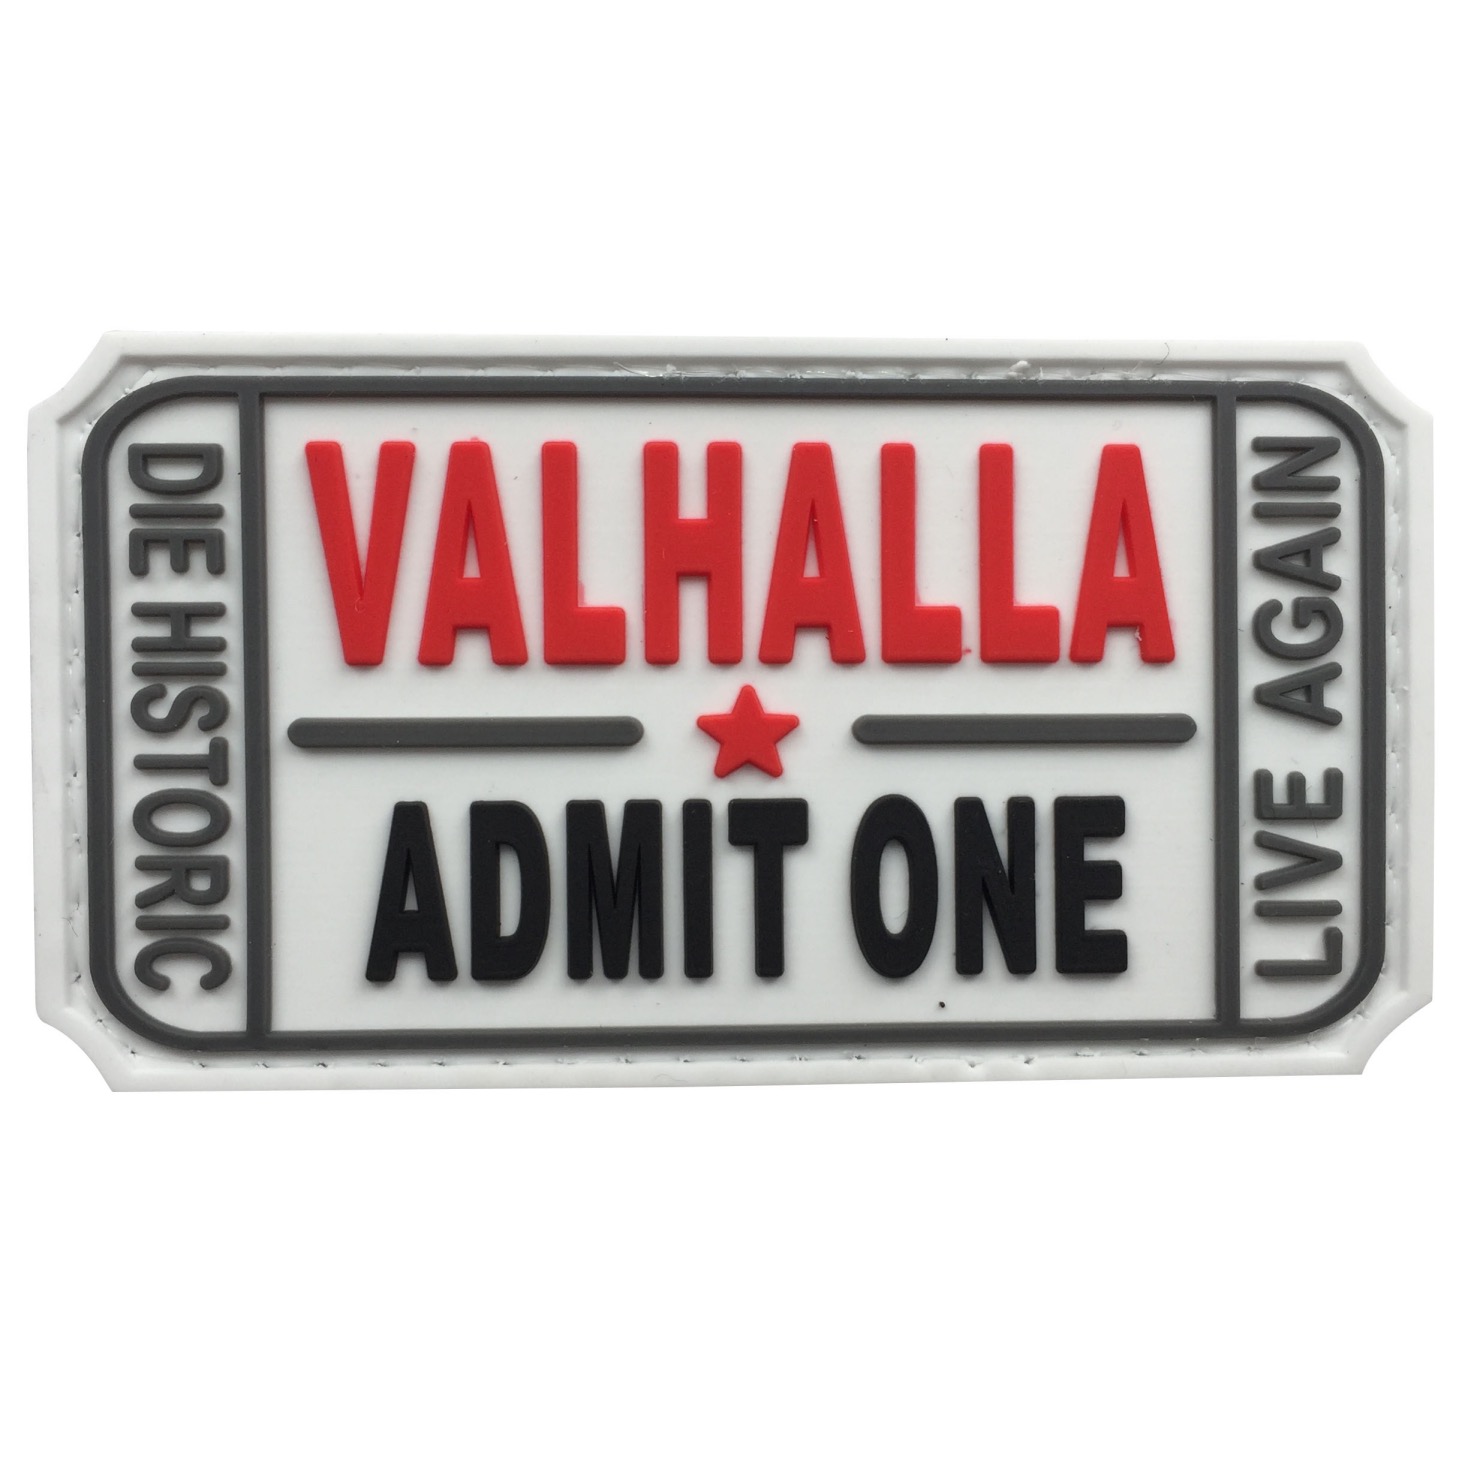 Valhalla Entrance Ticket PVC Patch - Various Colours - The Patch Board